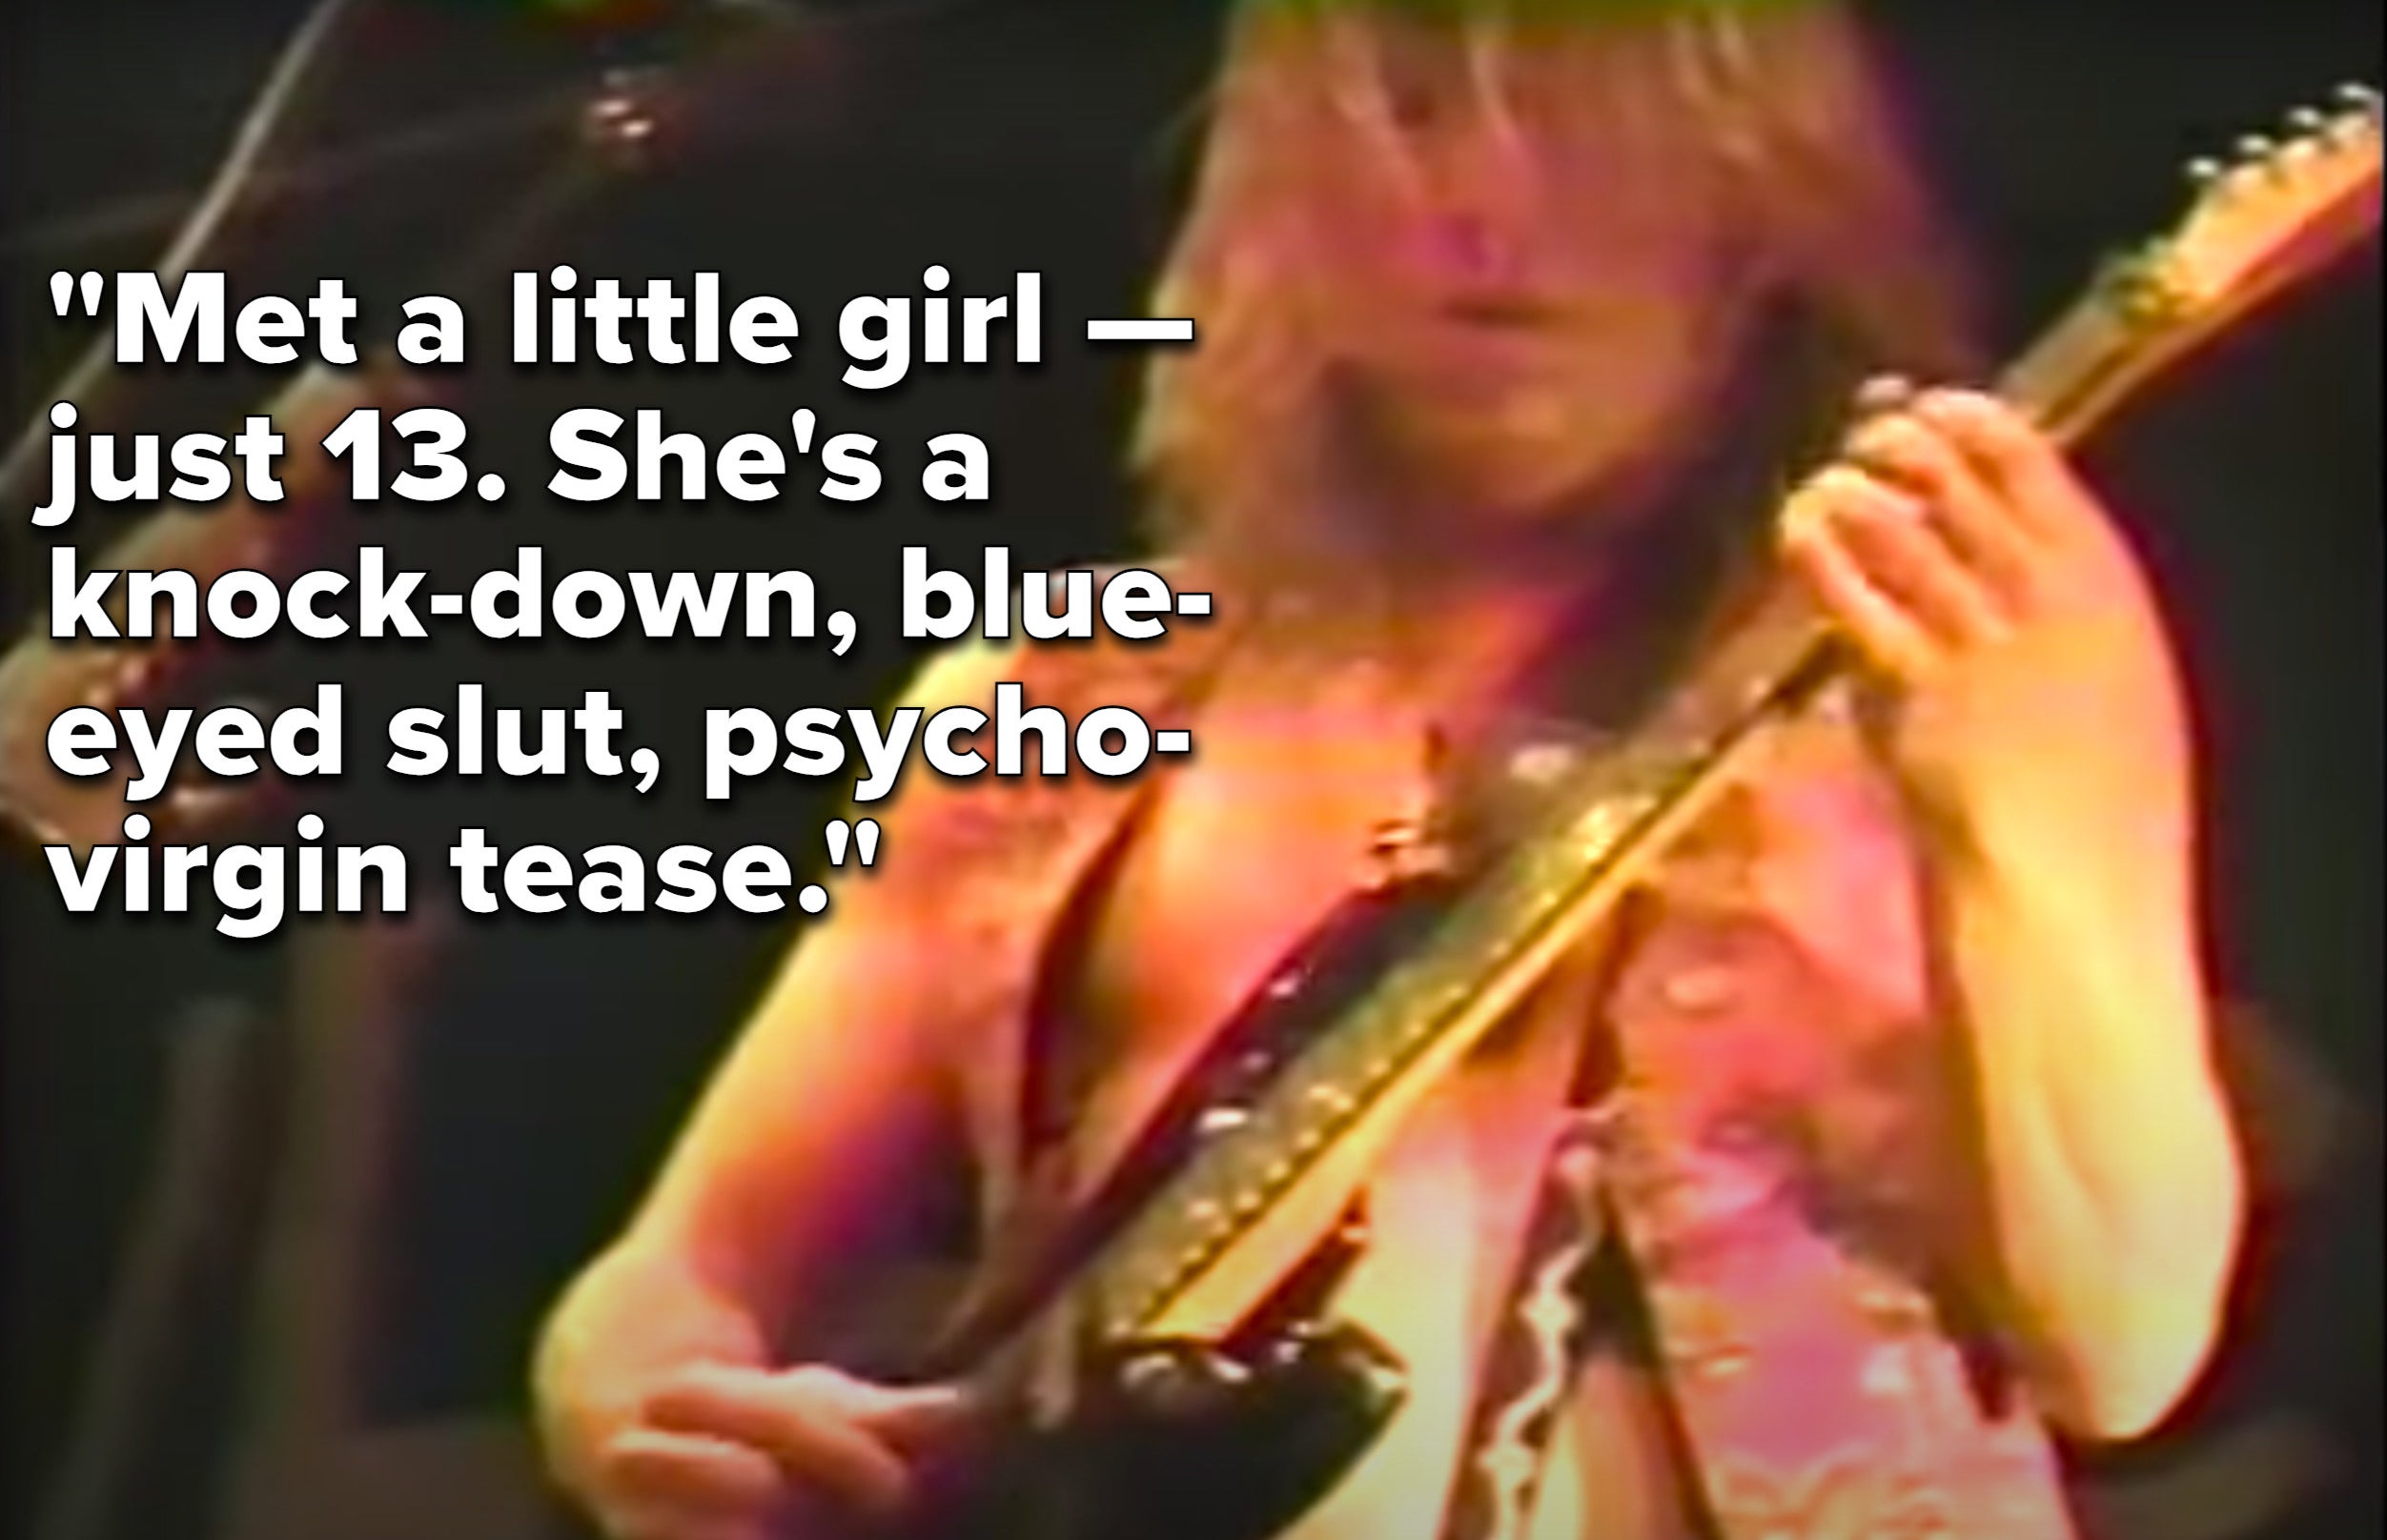 Man playing guitar with the lyrics &quot;Met a little girl — just 13; she&#x27;s a knock-down, blue-eyed slut, psycho-virgin tease&quot;